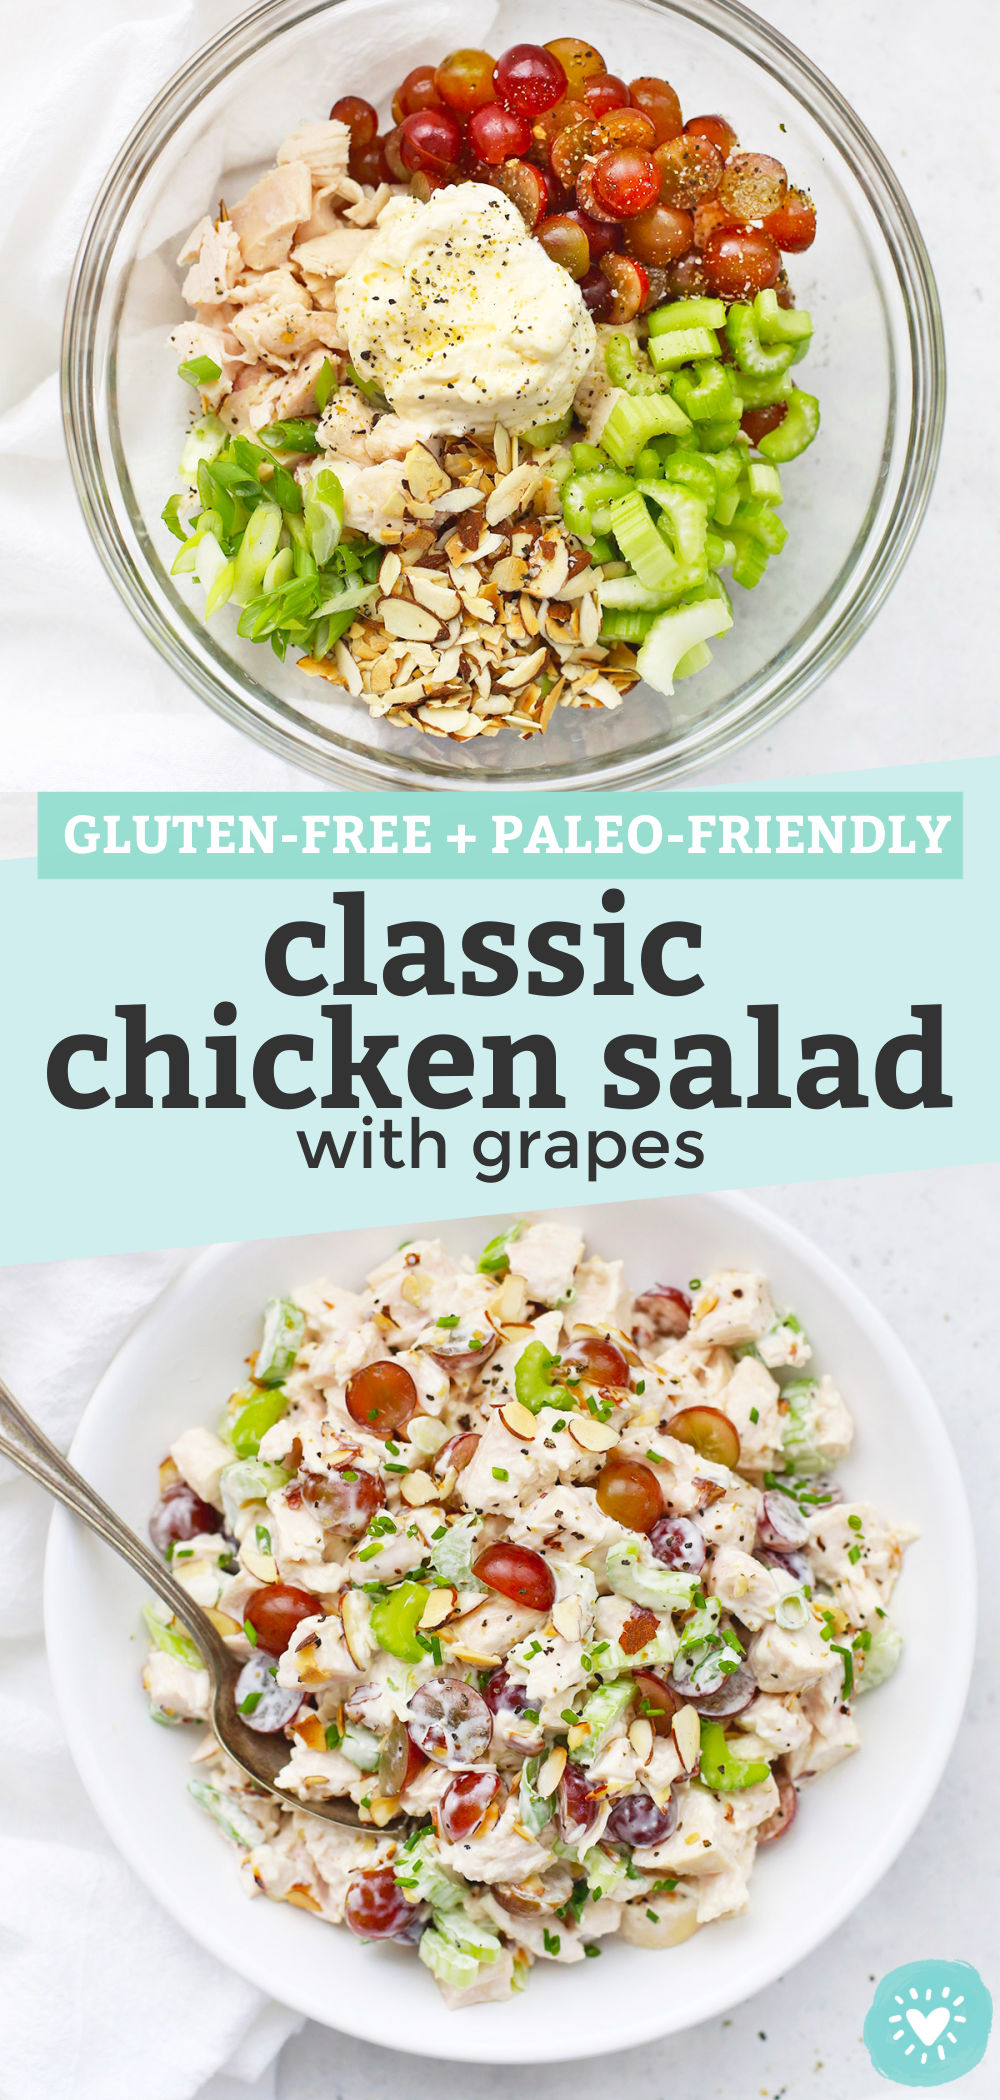 Collage of images of classic chicken salad with grapes with text overlay that reads "Gluten-Free + Paleo-Friendly Classic Chicken Salad with Grapes"